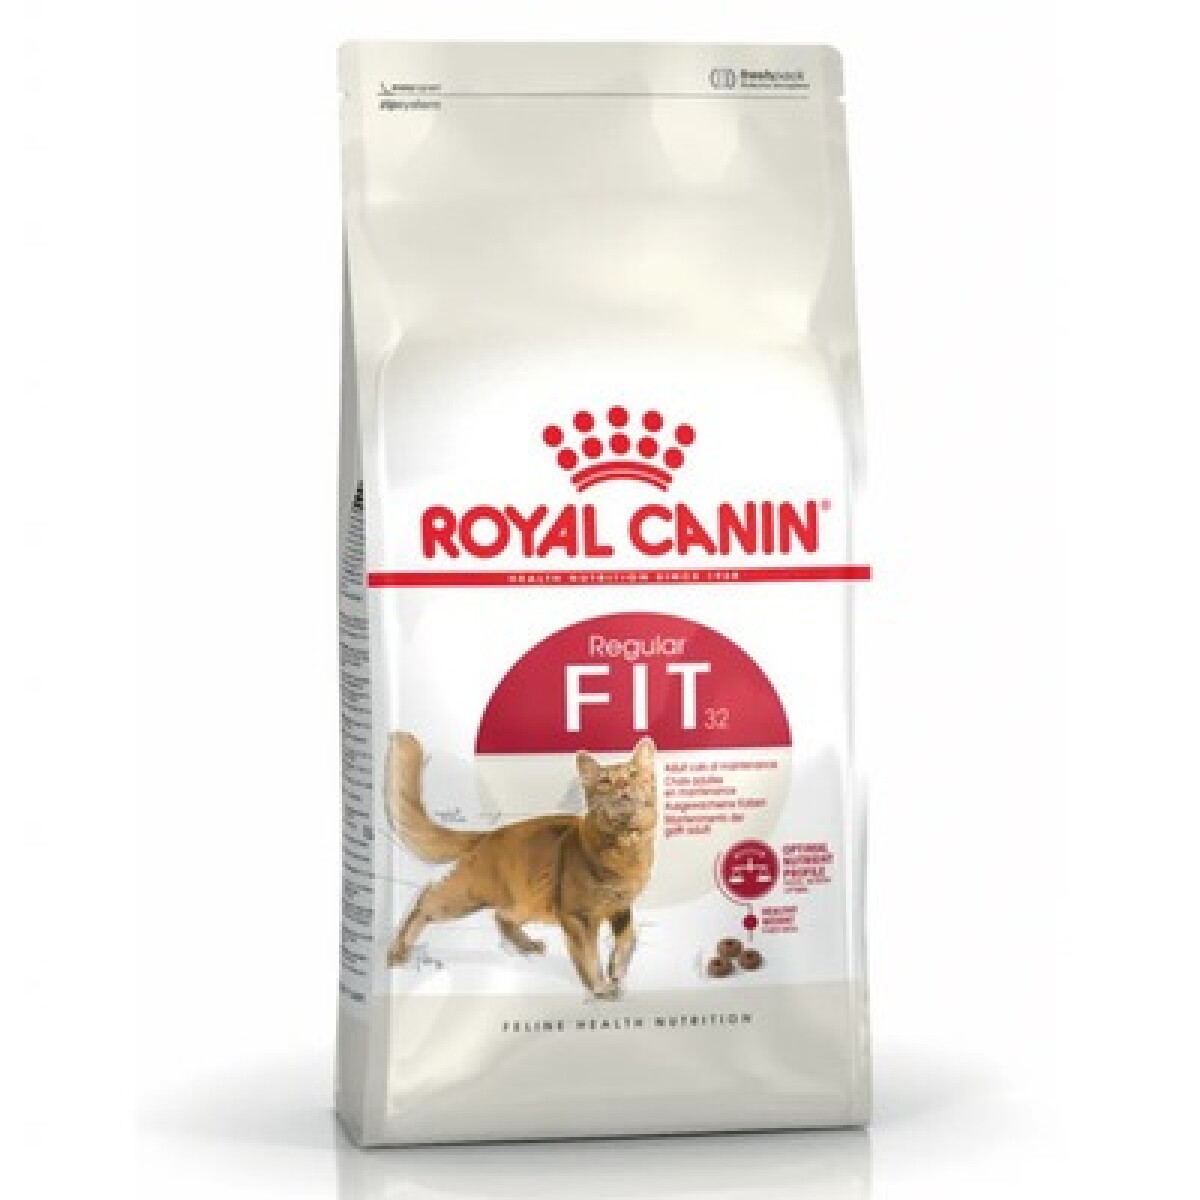 ROYAL CANIN FIT 32 1,5 KG - Unica 